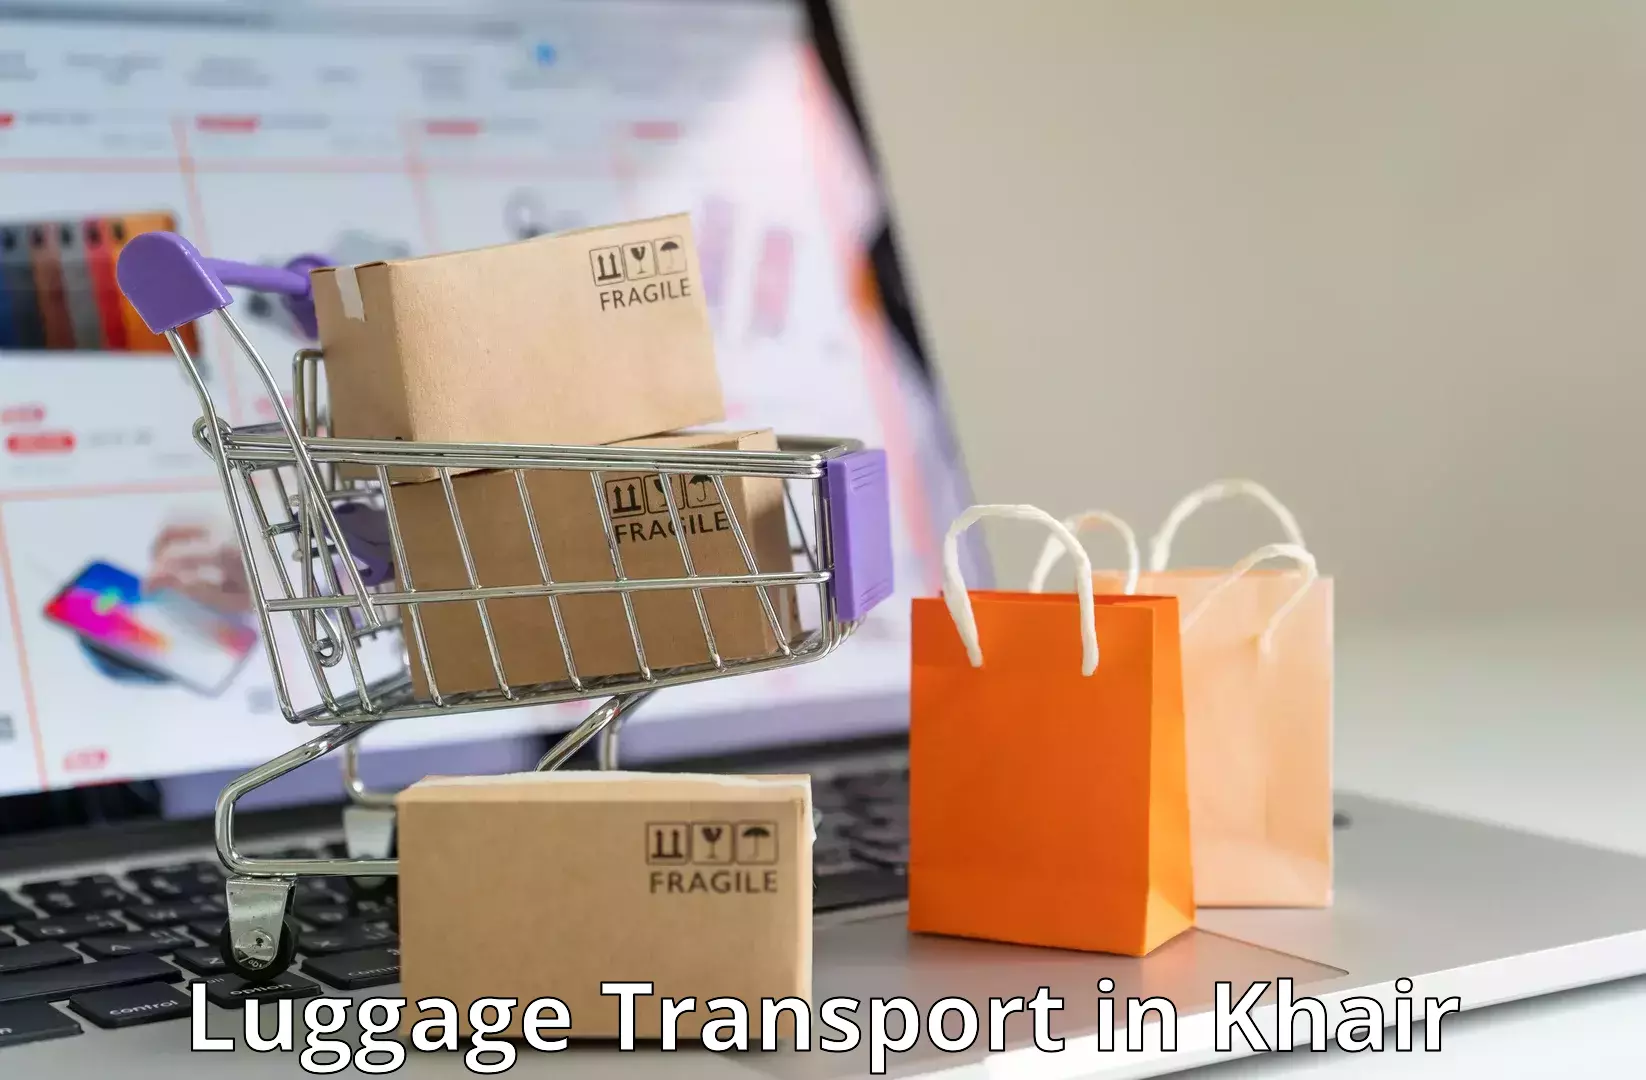 Luggage shipping planner in Khair